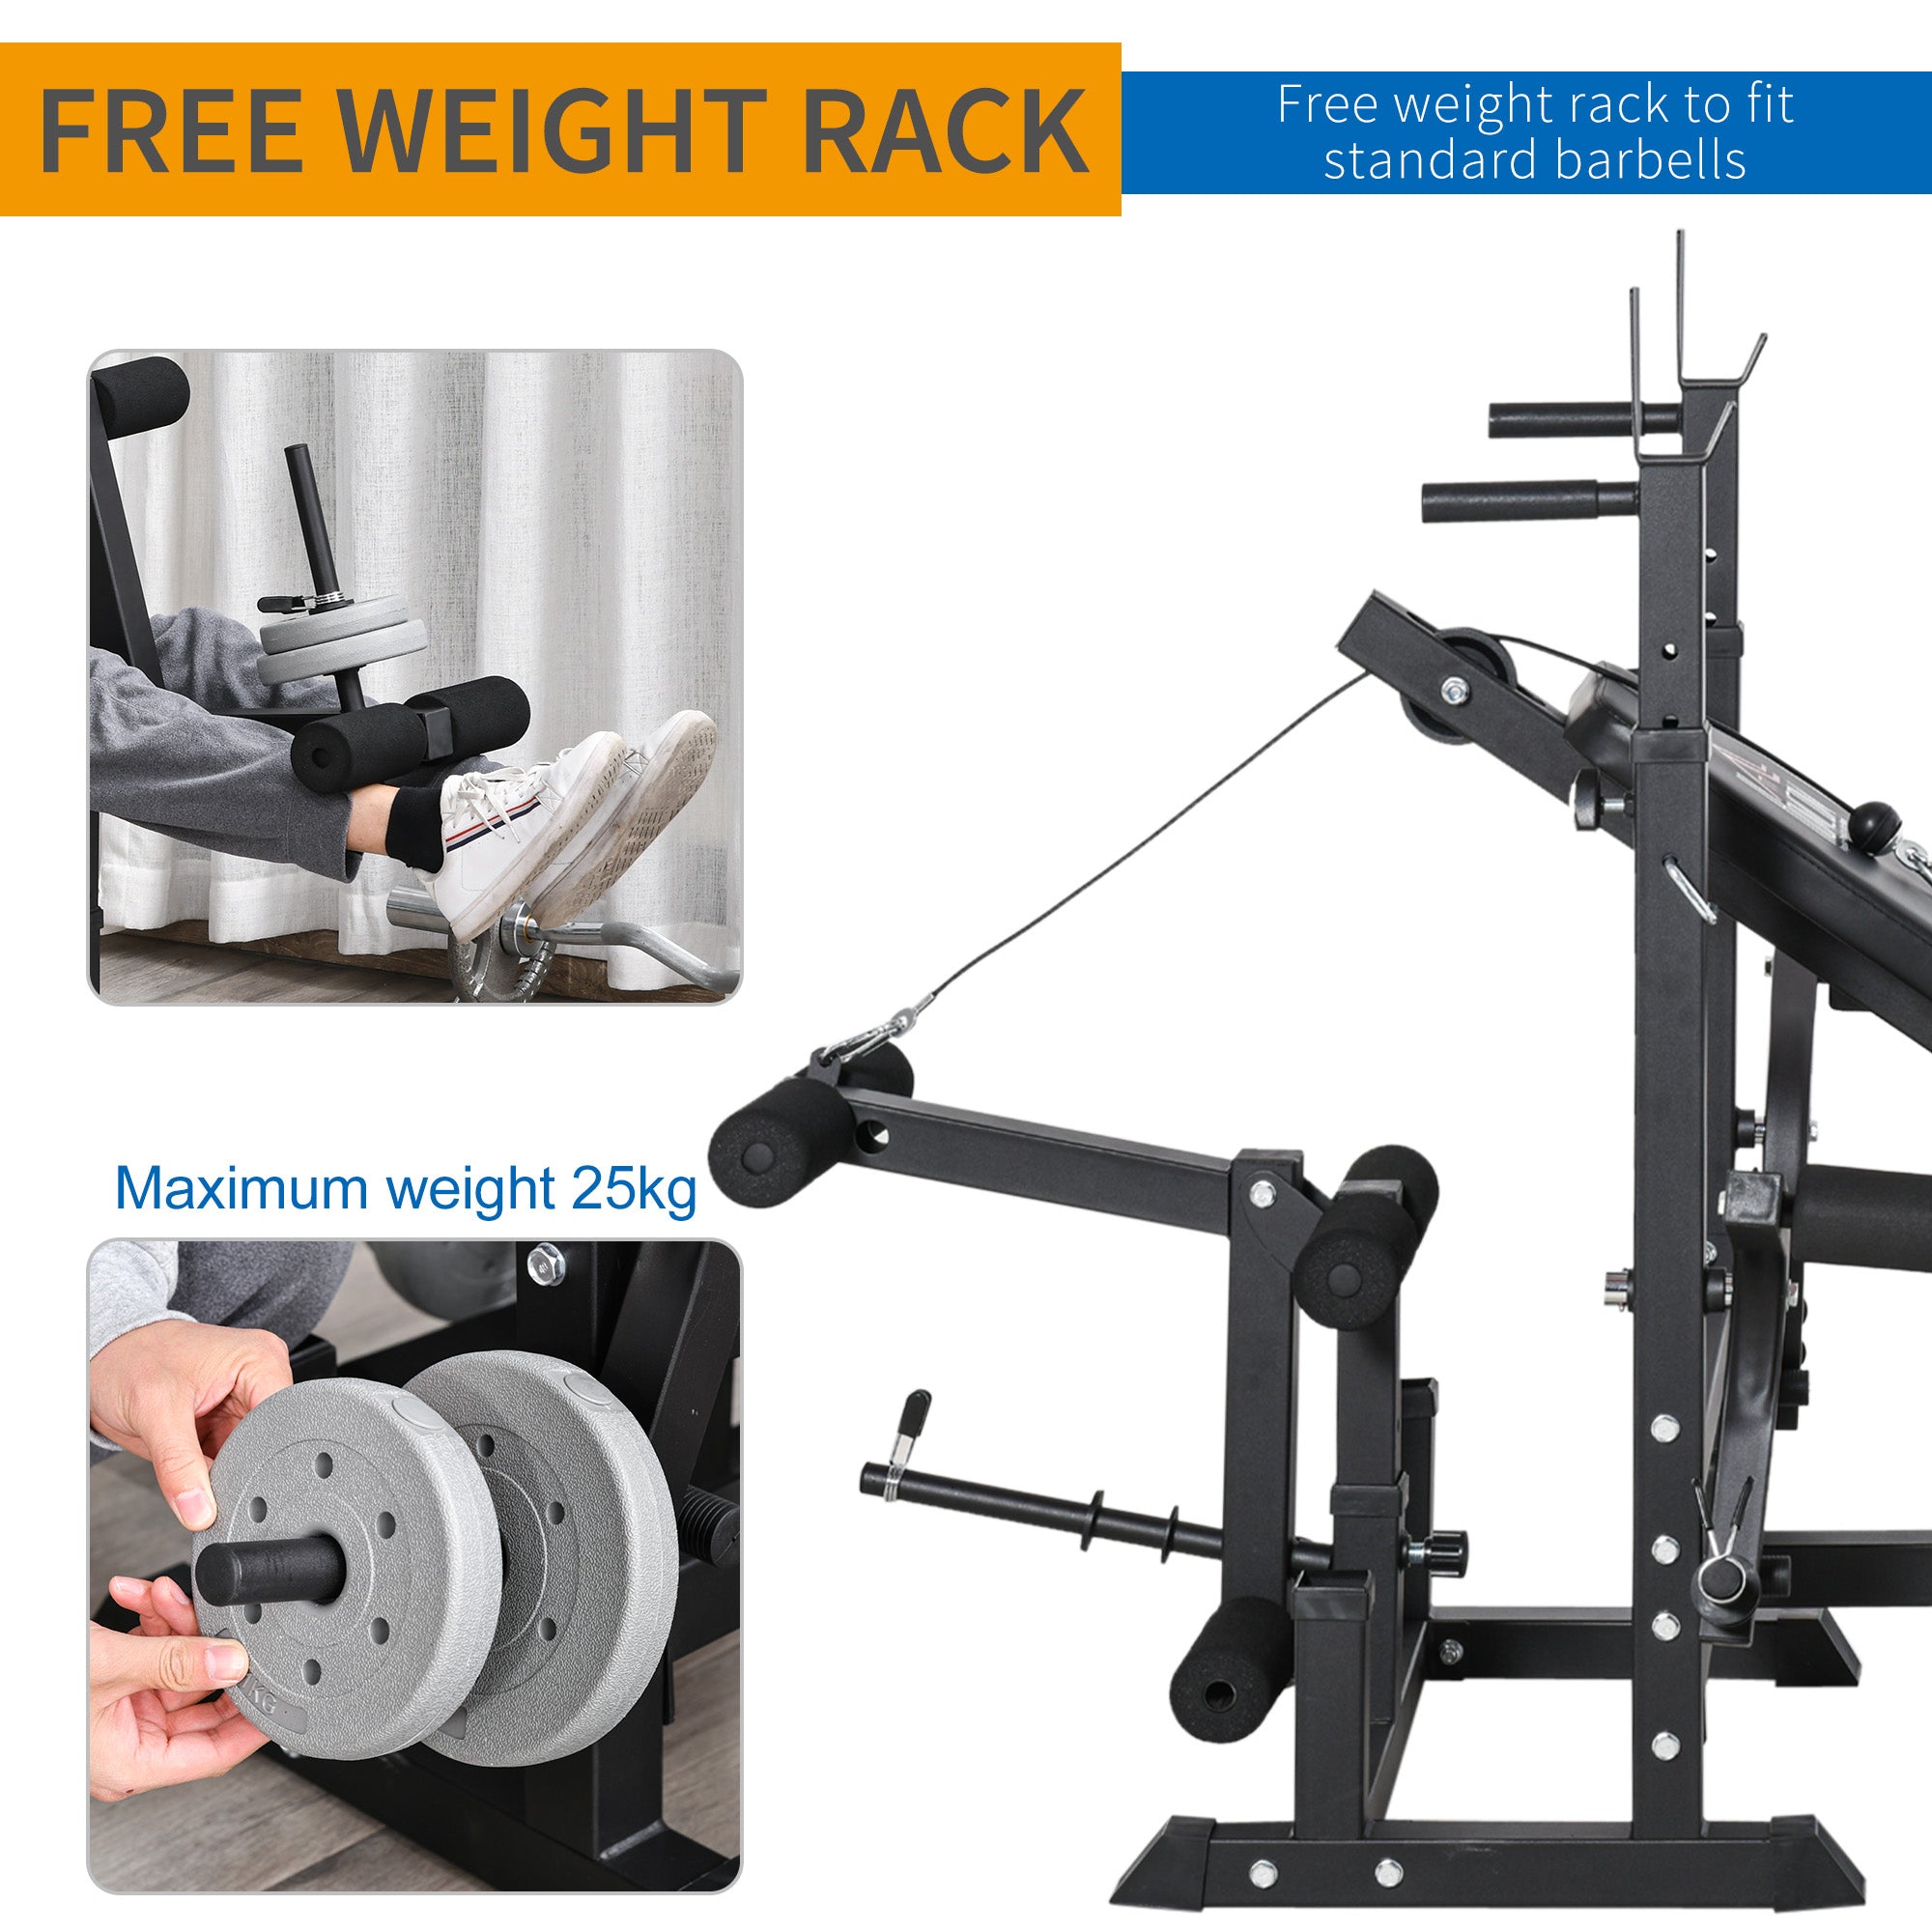 HOMCOM Multi-Exercise Full-Body Weight Rack with Bench Press, Leg Extension, Chest Fly Resistance Band & Preacher Curl - Inspirely